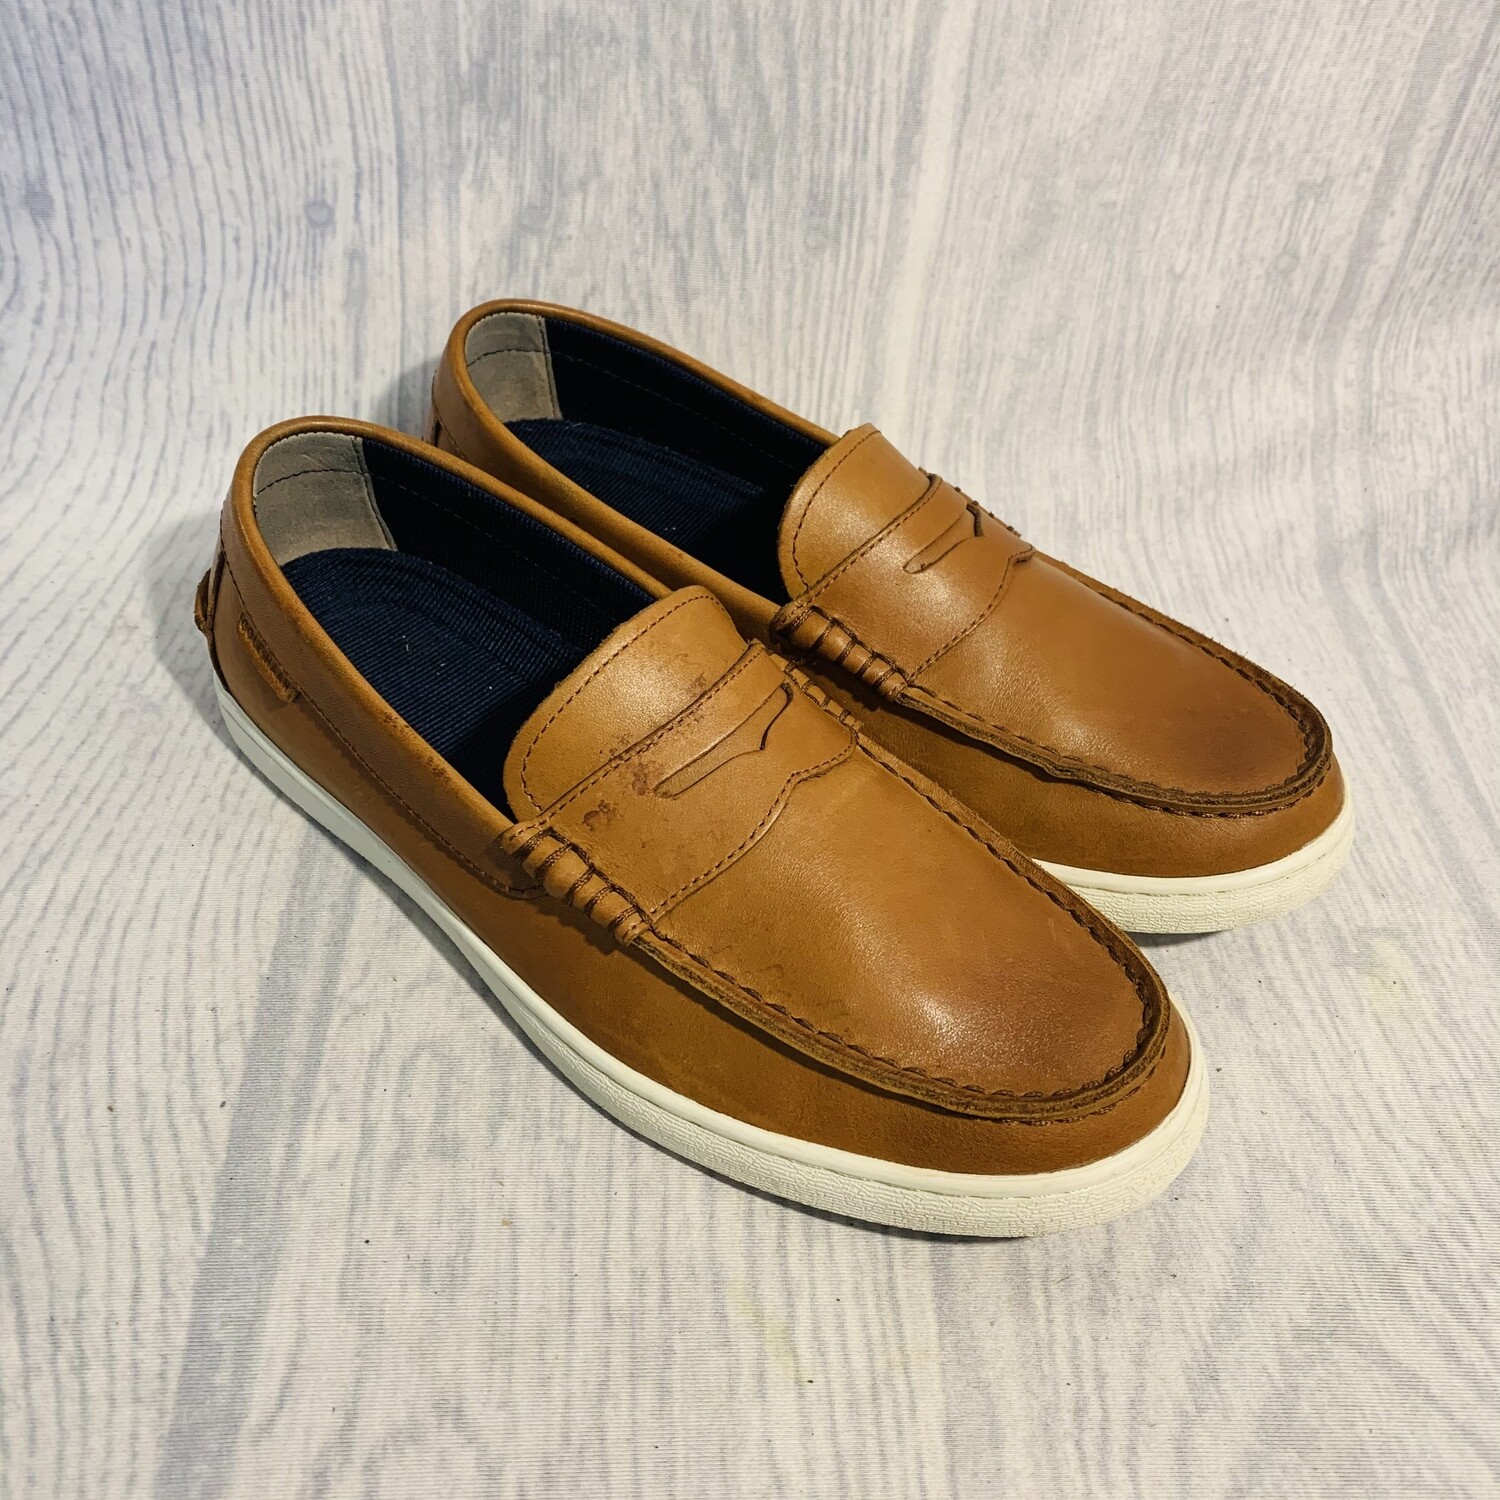 Size 9 Cole Haan Nantucket Loafer